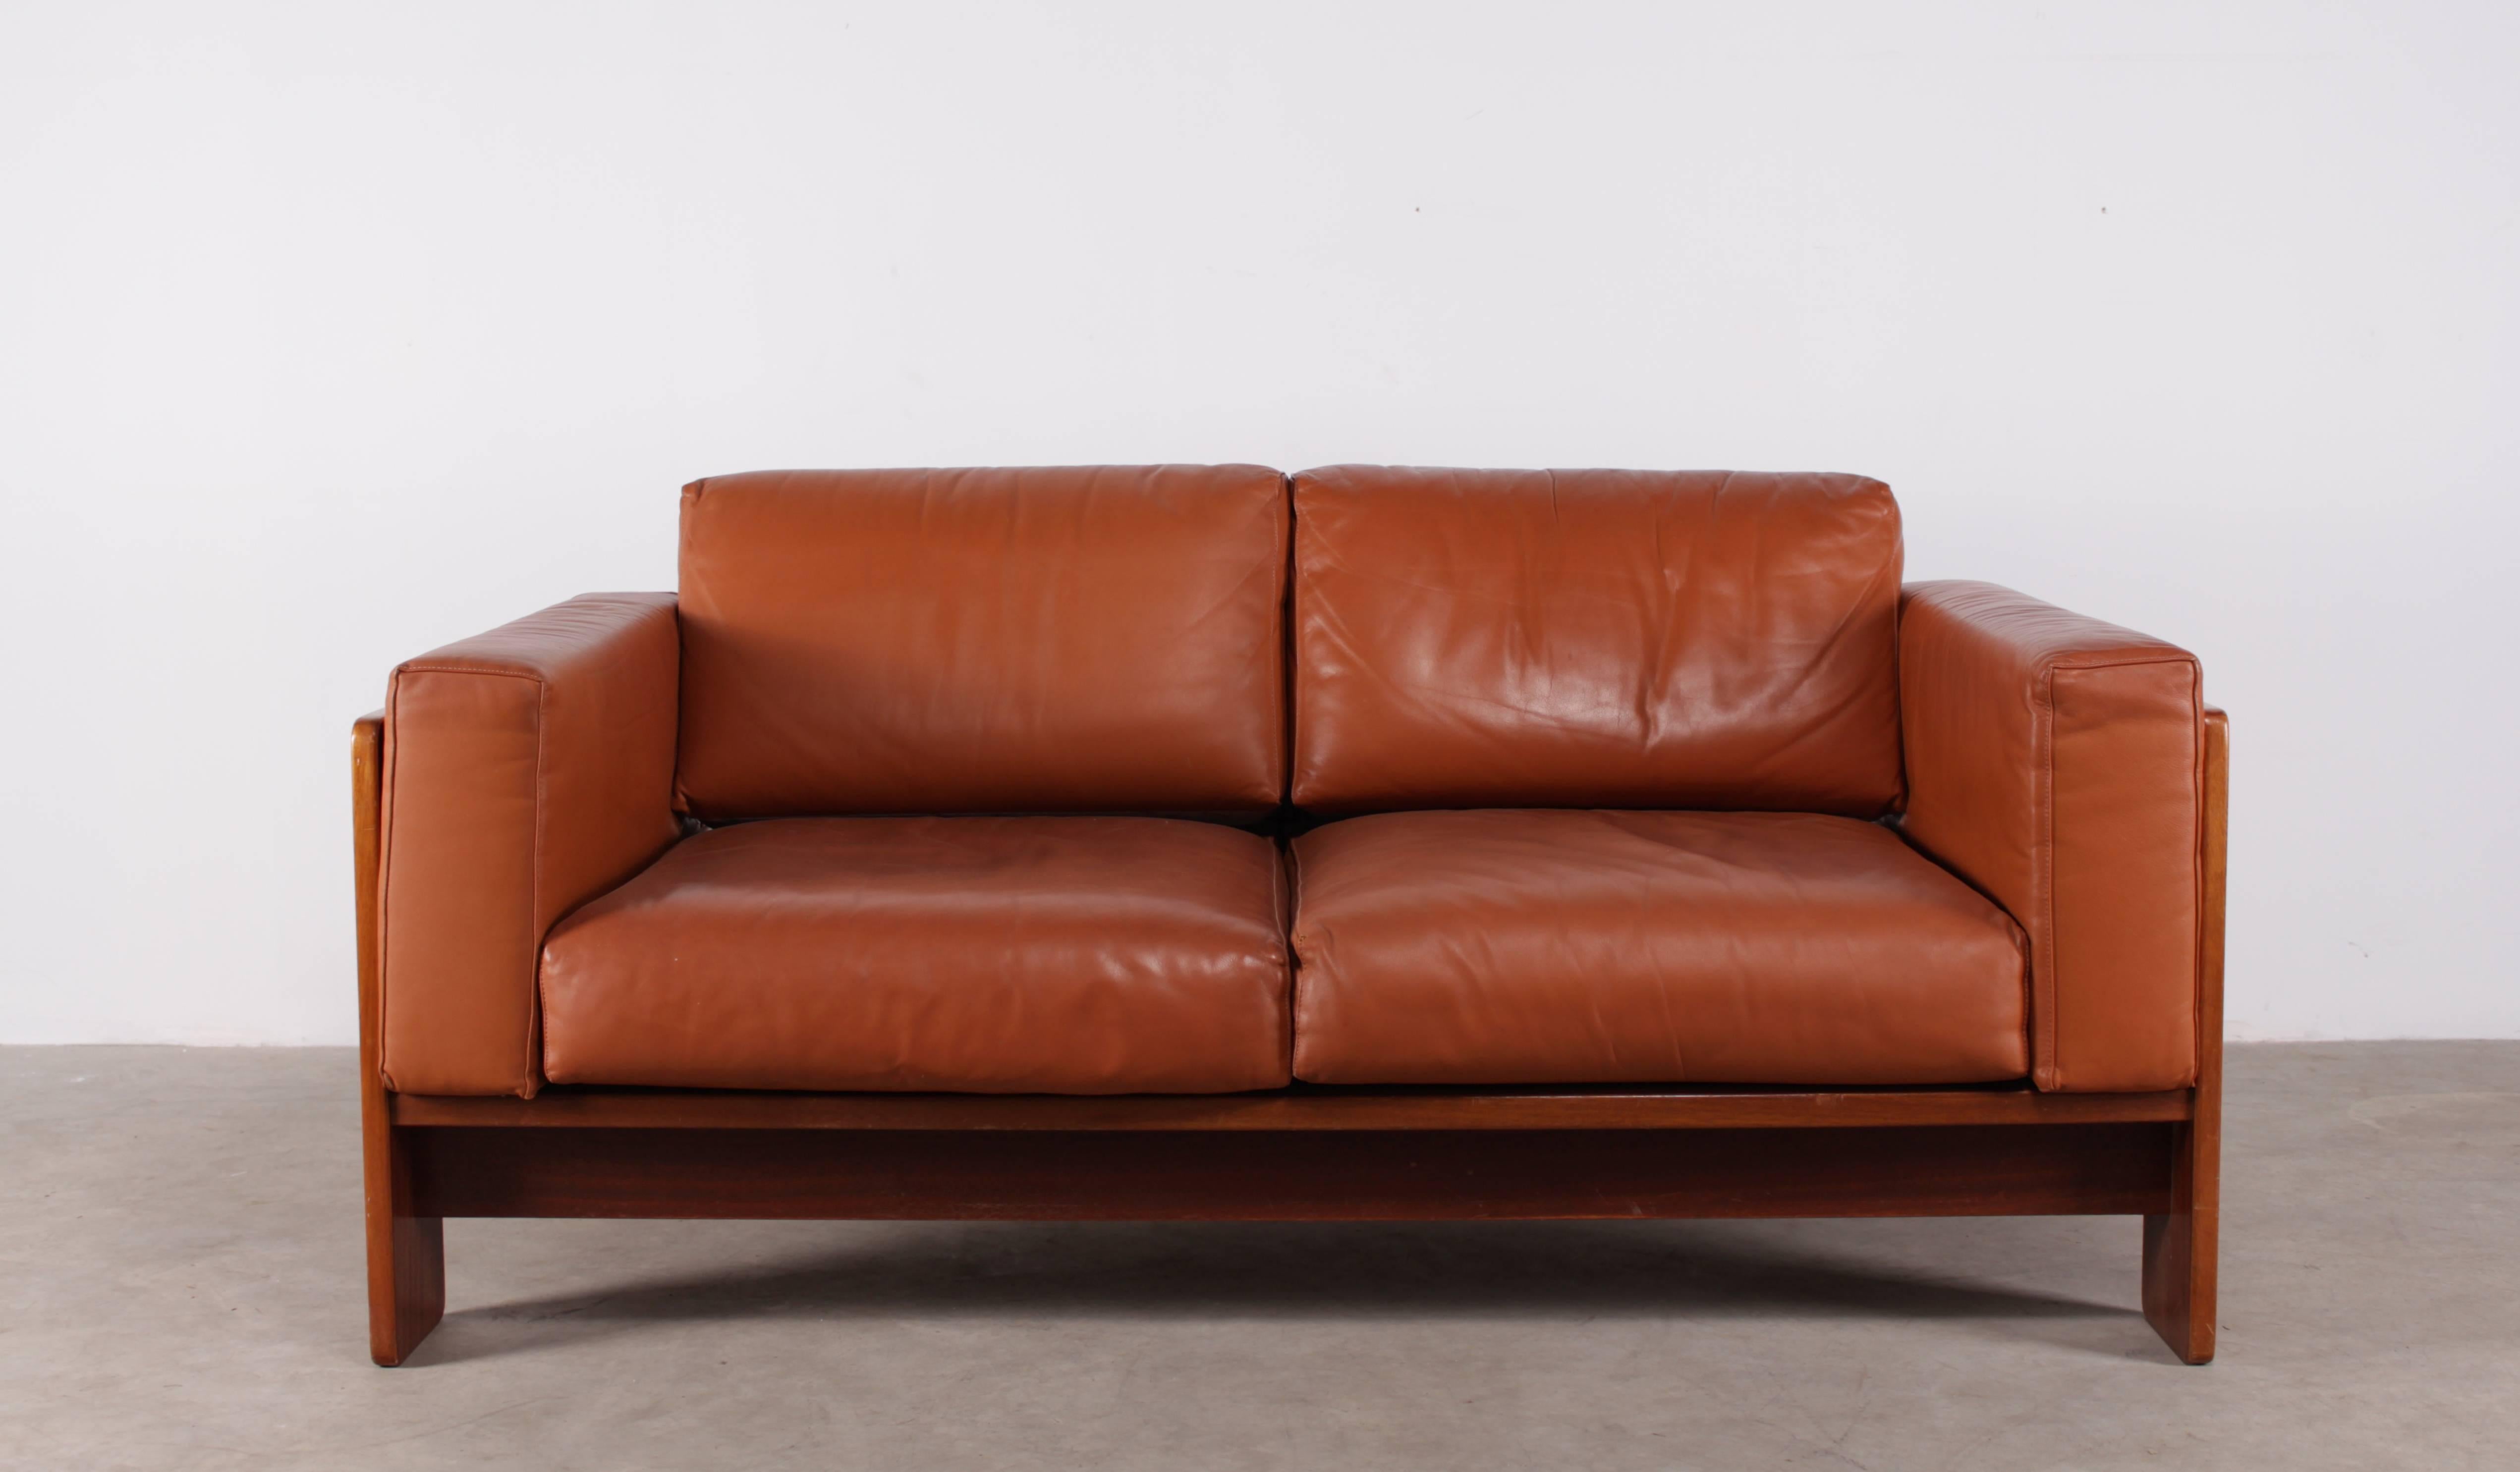 A leather sofa designed by Tobia Scarpa for Knoll.
This Bastiano is in excellent condition, mahogany frame and original 